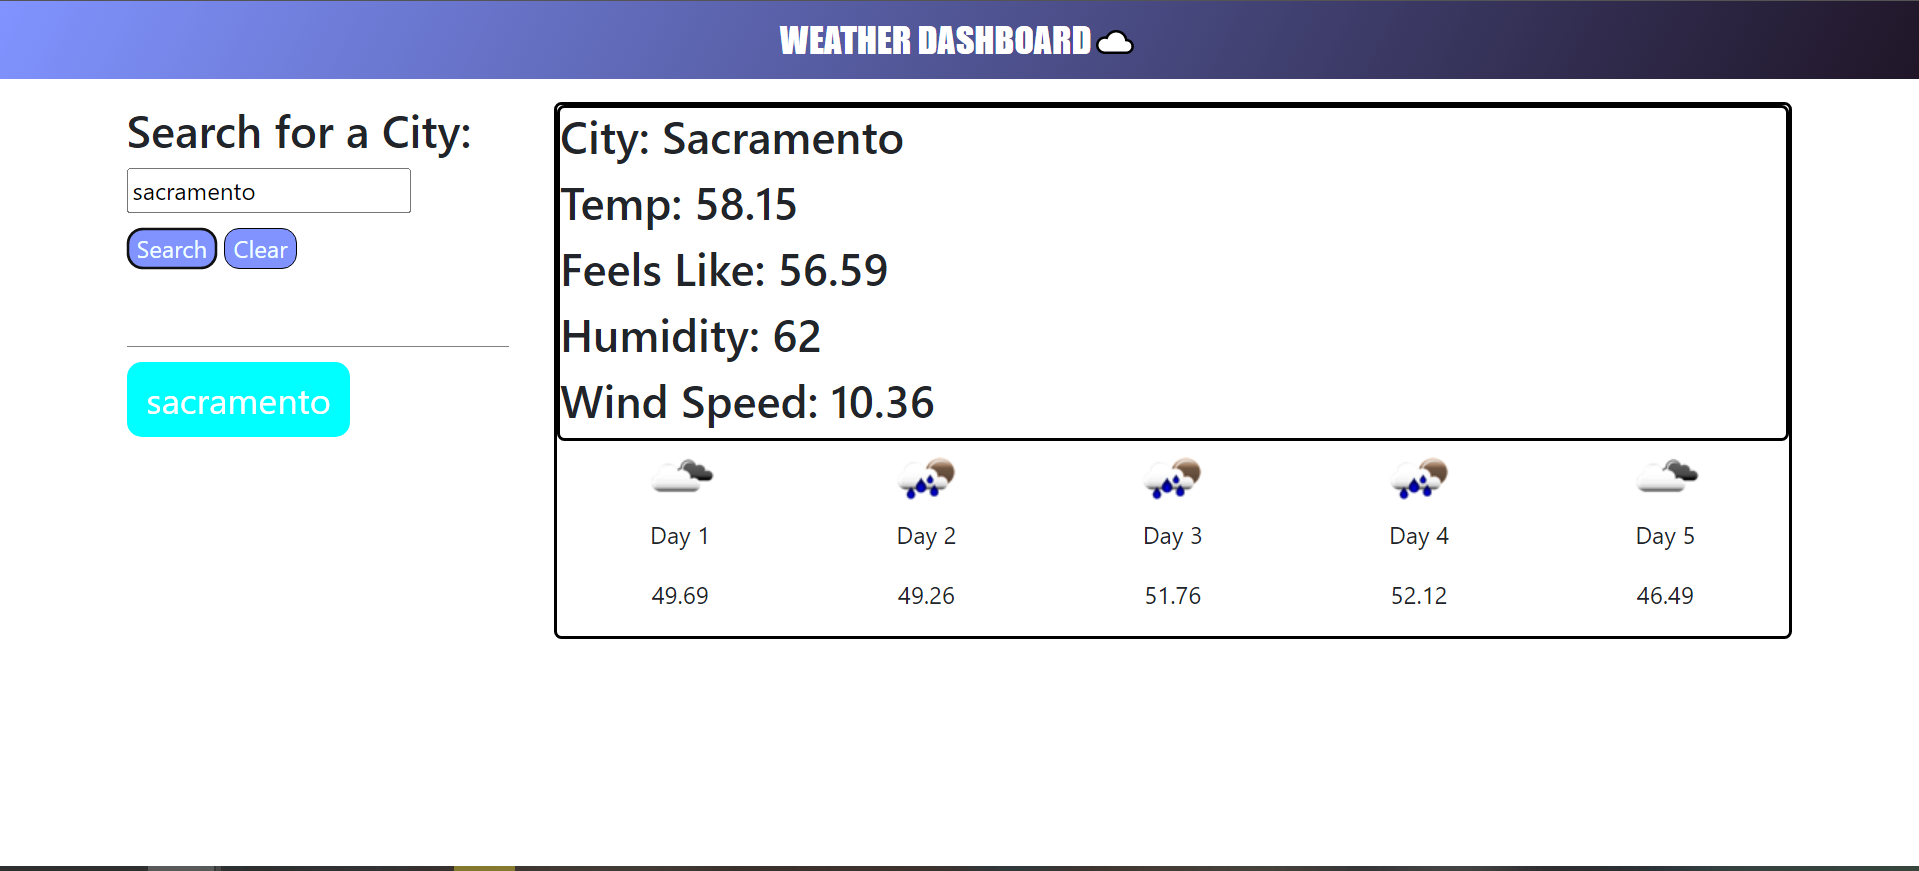 The weather app includes a search option, a list of cities, and a five-day forecast and current weather conditions for Sacramento.